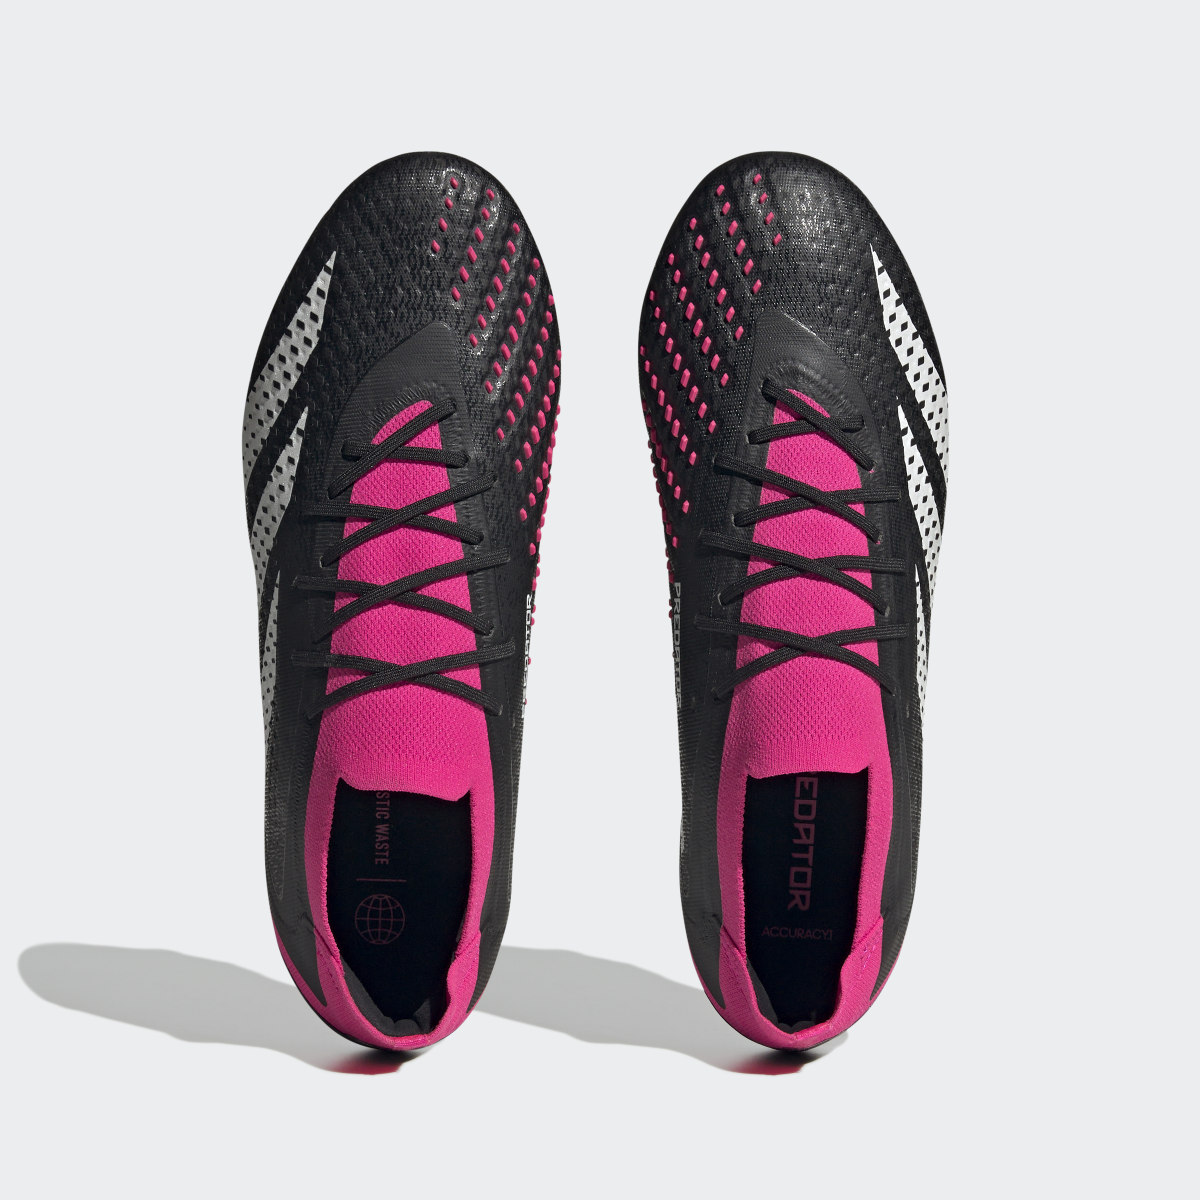 Adidas Predator Accuracy.1 Low Firm Ground Cleats. 7